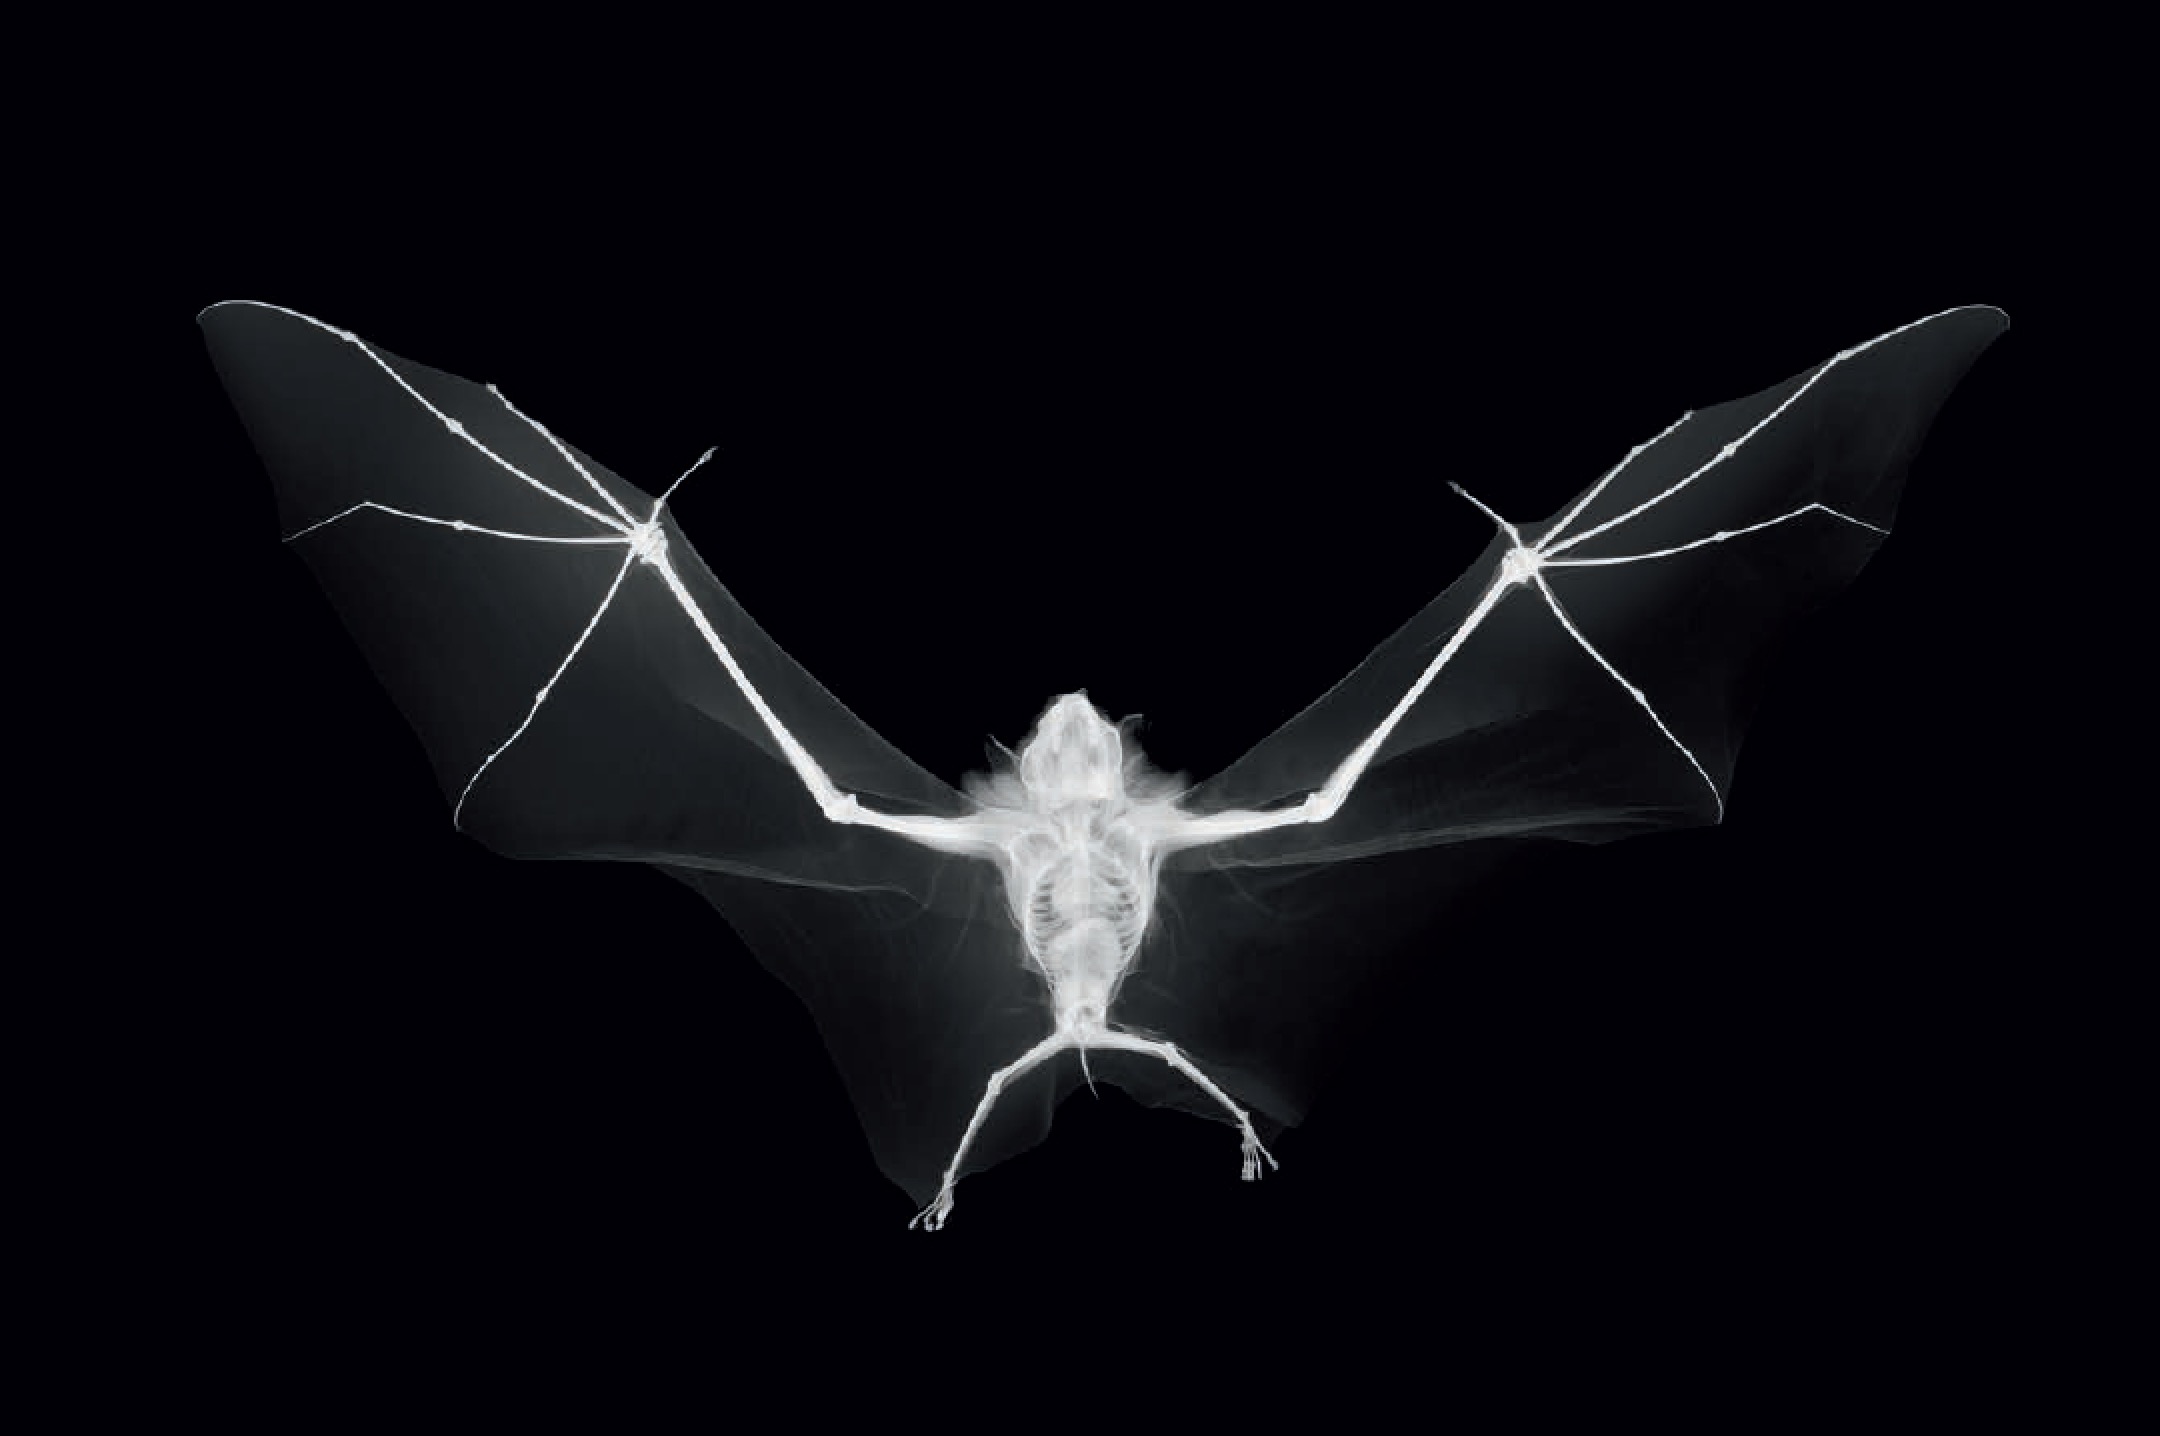 The Fruit Bat - photographed by Nick Veasey and featured in Animal: Exploring the Zoological World